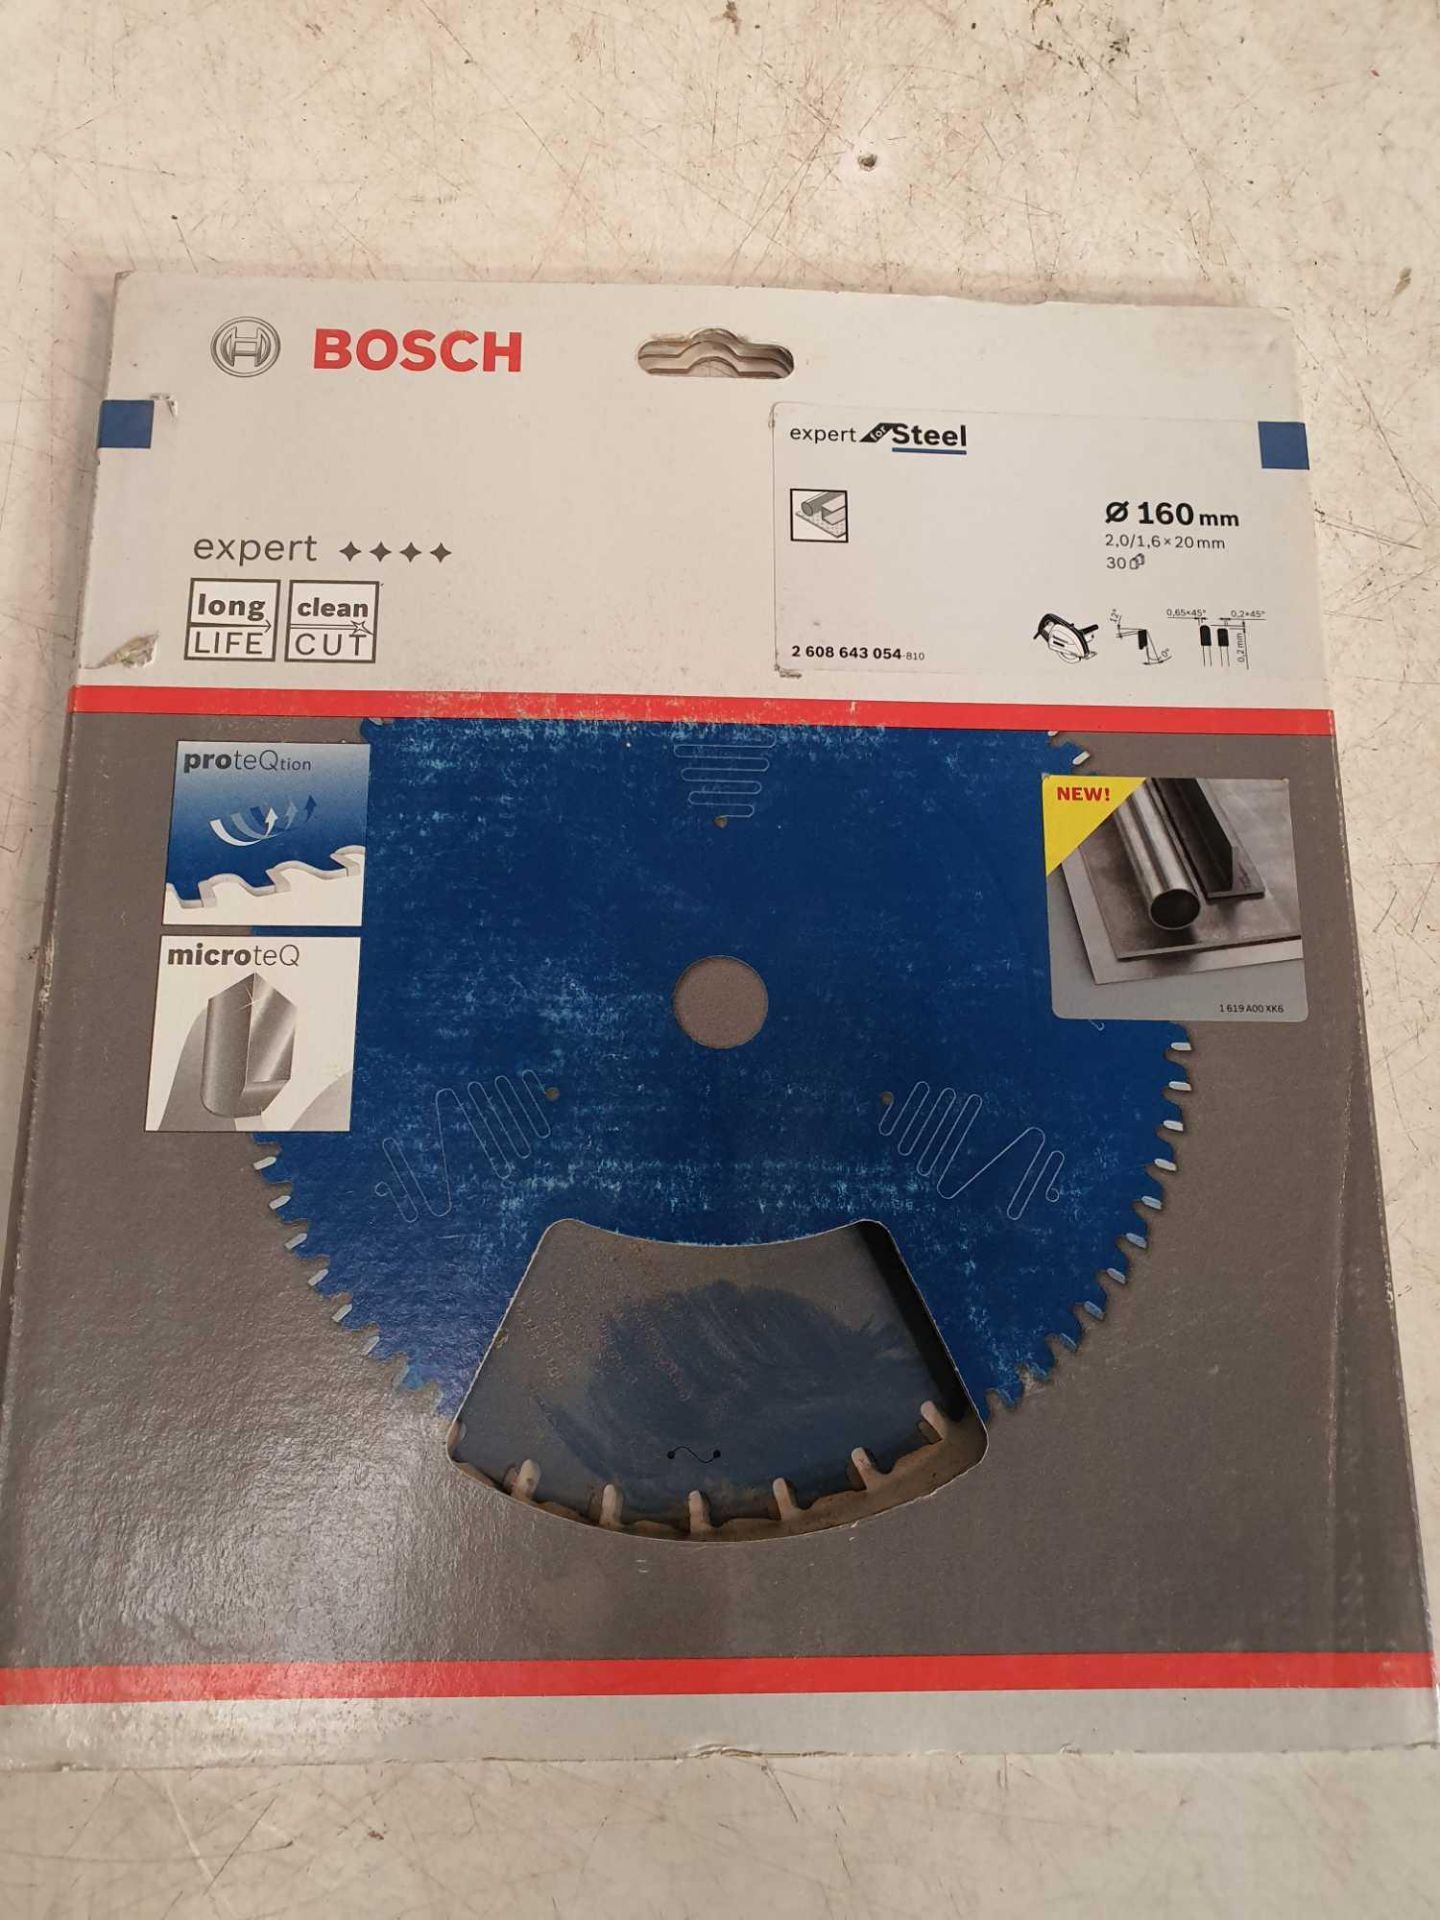 Bosch expert for steel blade for circular saw